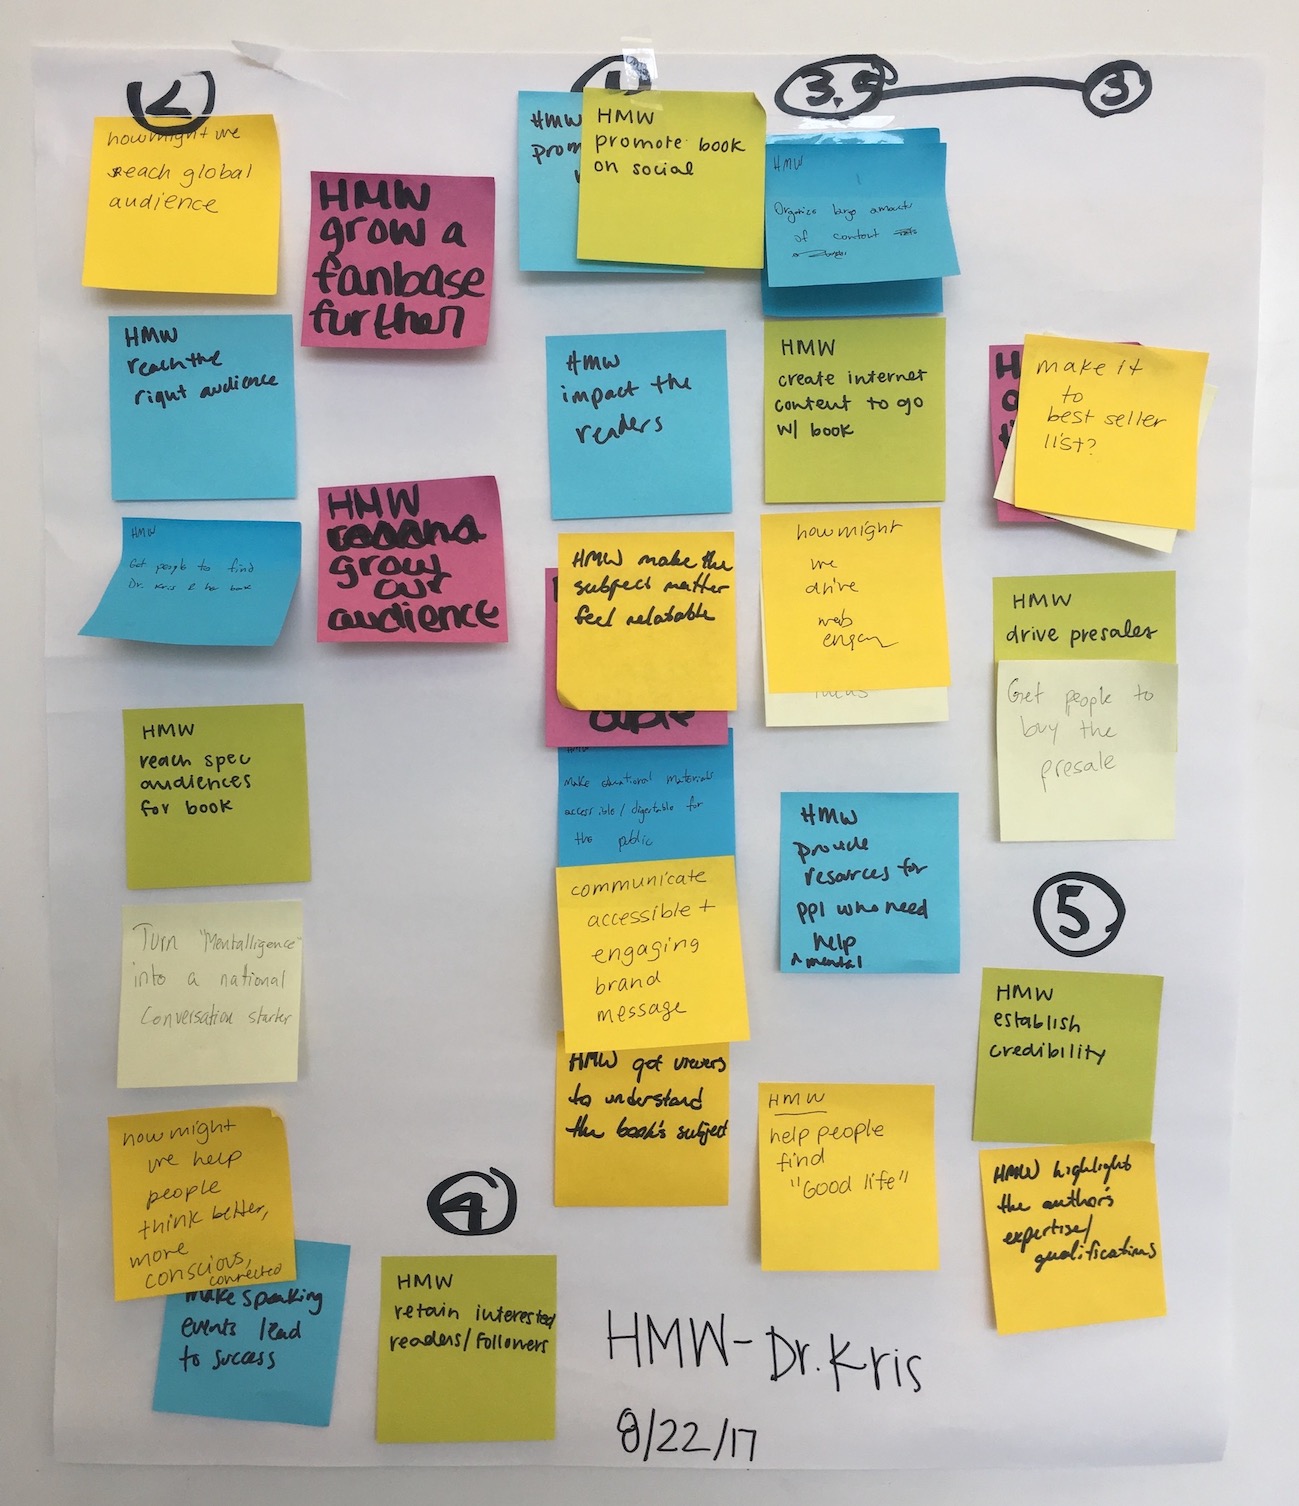 A brainstorming exercise where my team placed sticky notes on a board to help us prioritize deliverables for the client.